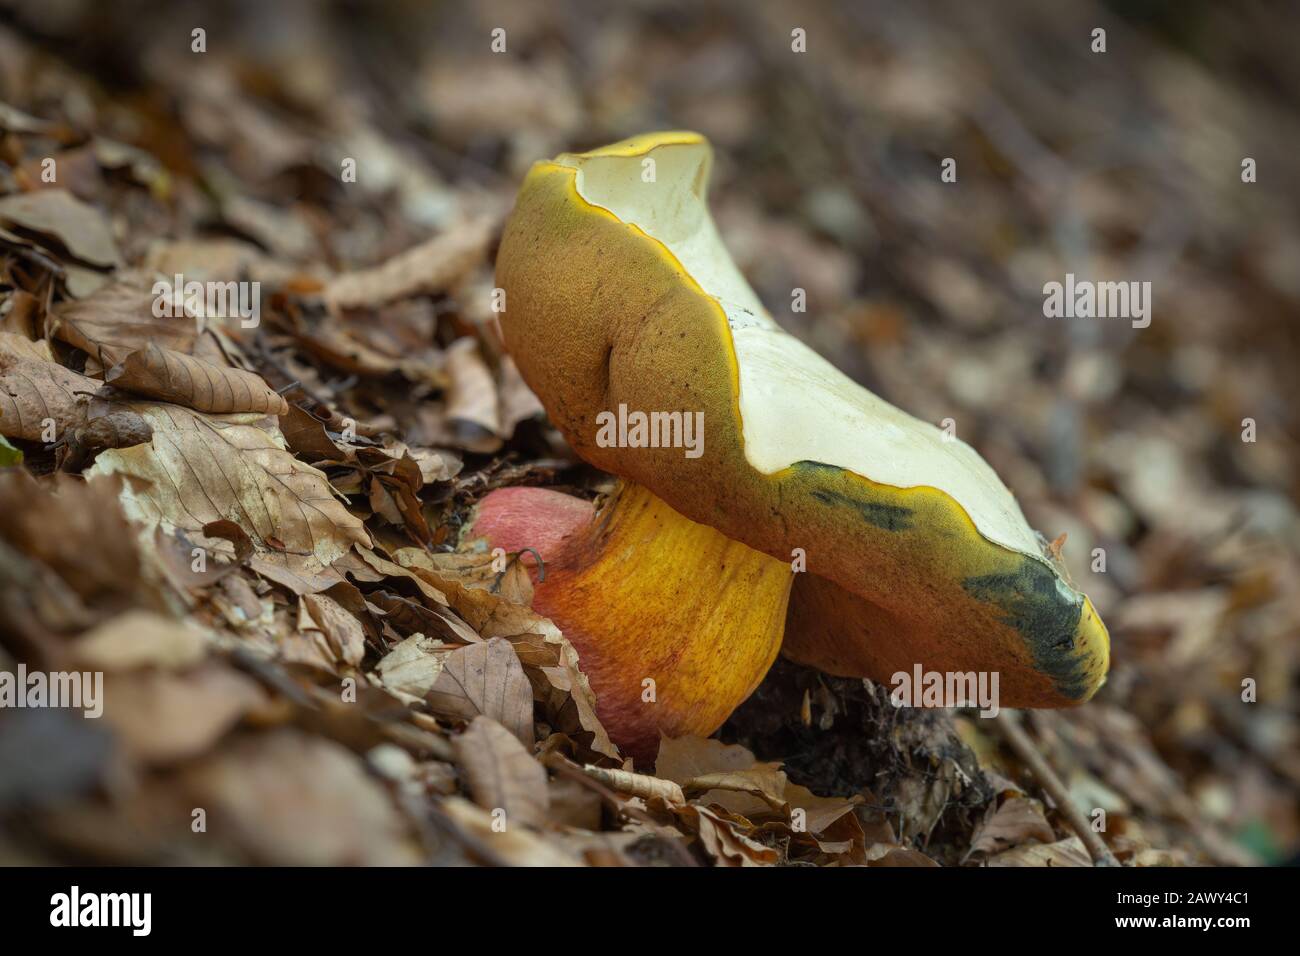 The poisonous fungus Rubroboletus satanas grows in the forests of Central Europe. Stock Photo